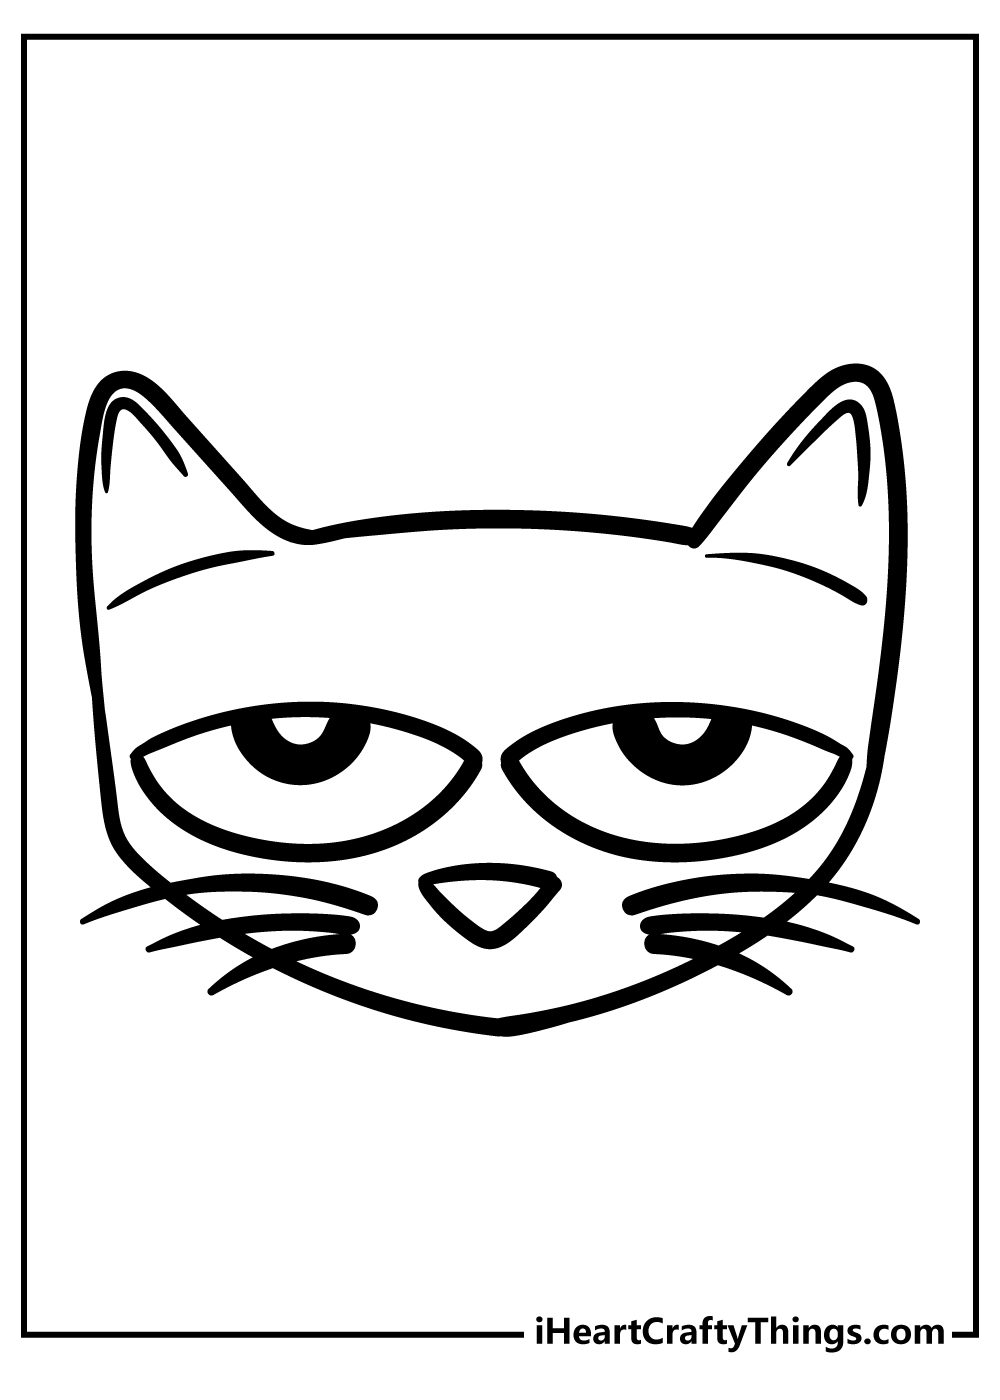 Pete the cat coloring pages free printables